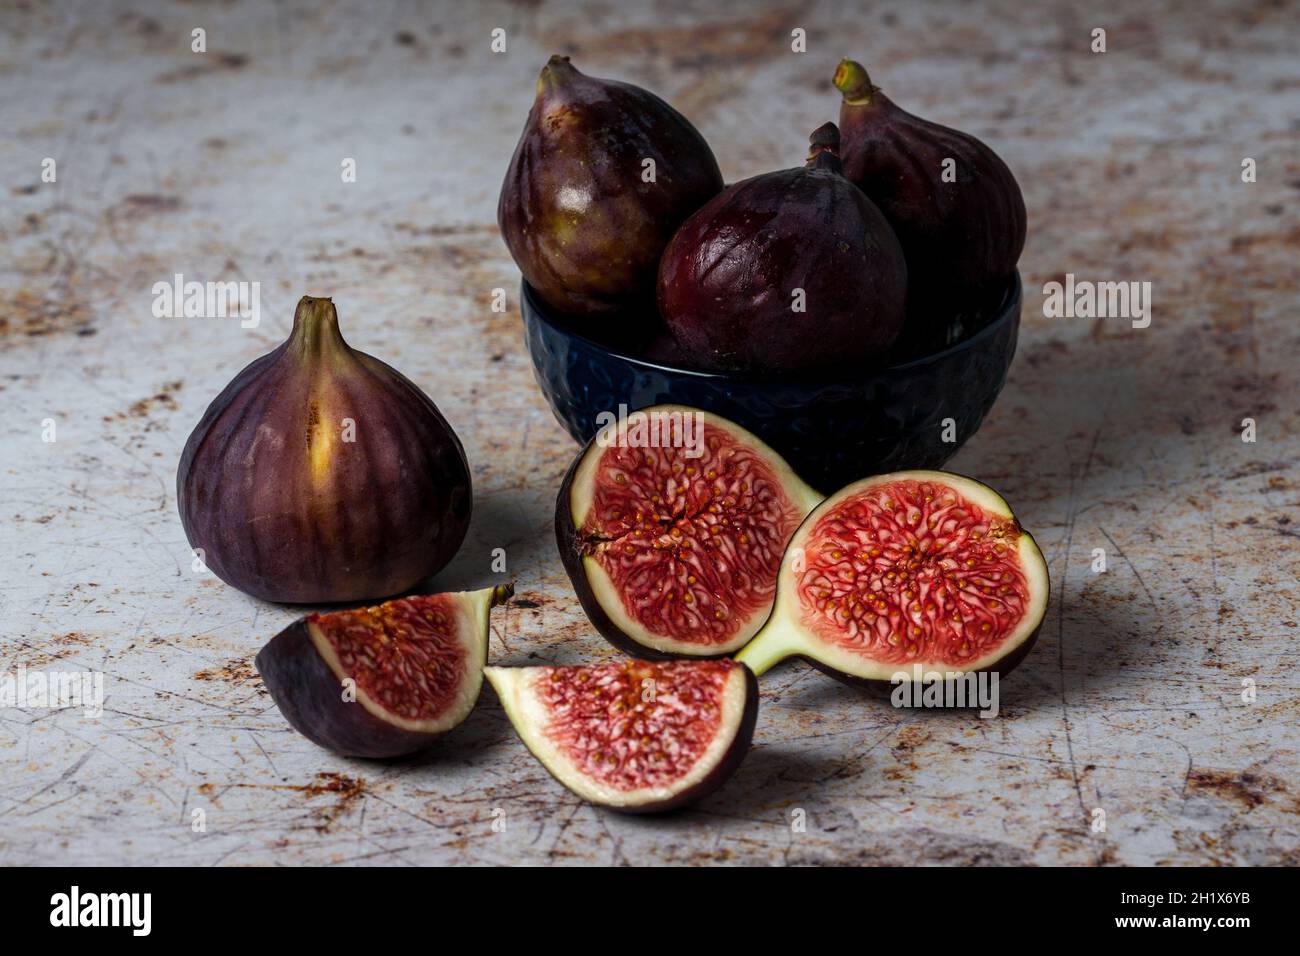 Figs on textured backdrop Stock Photo